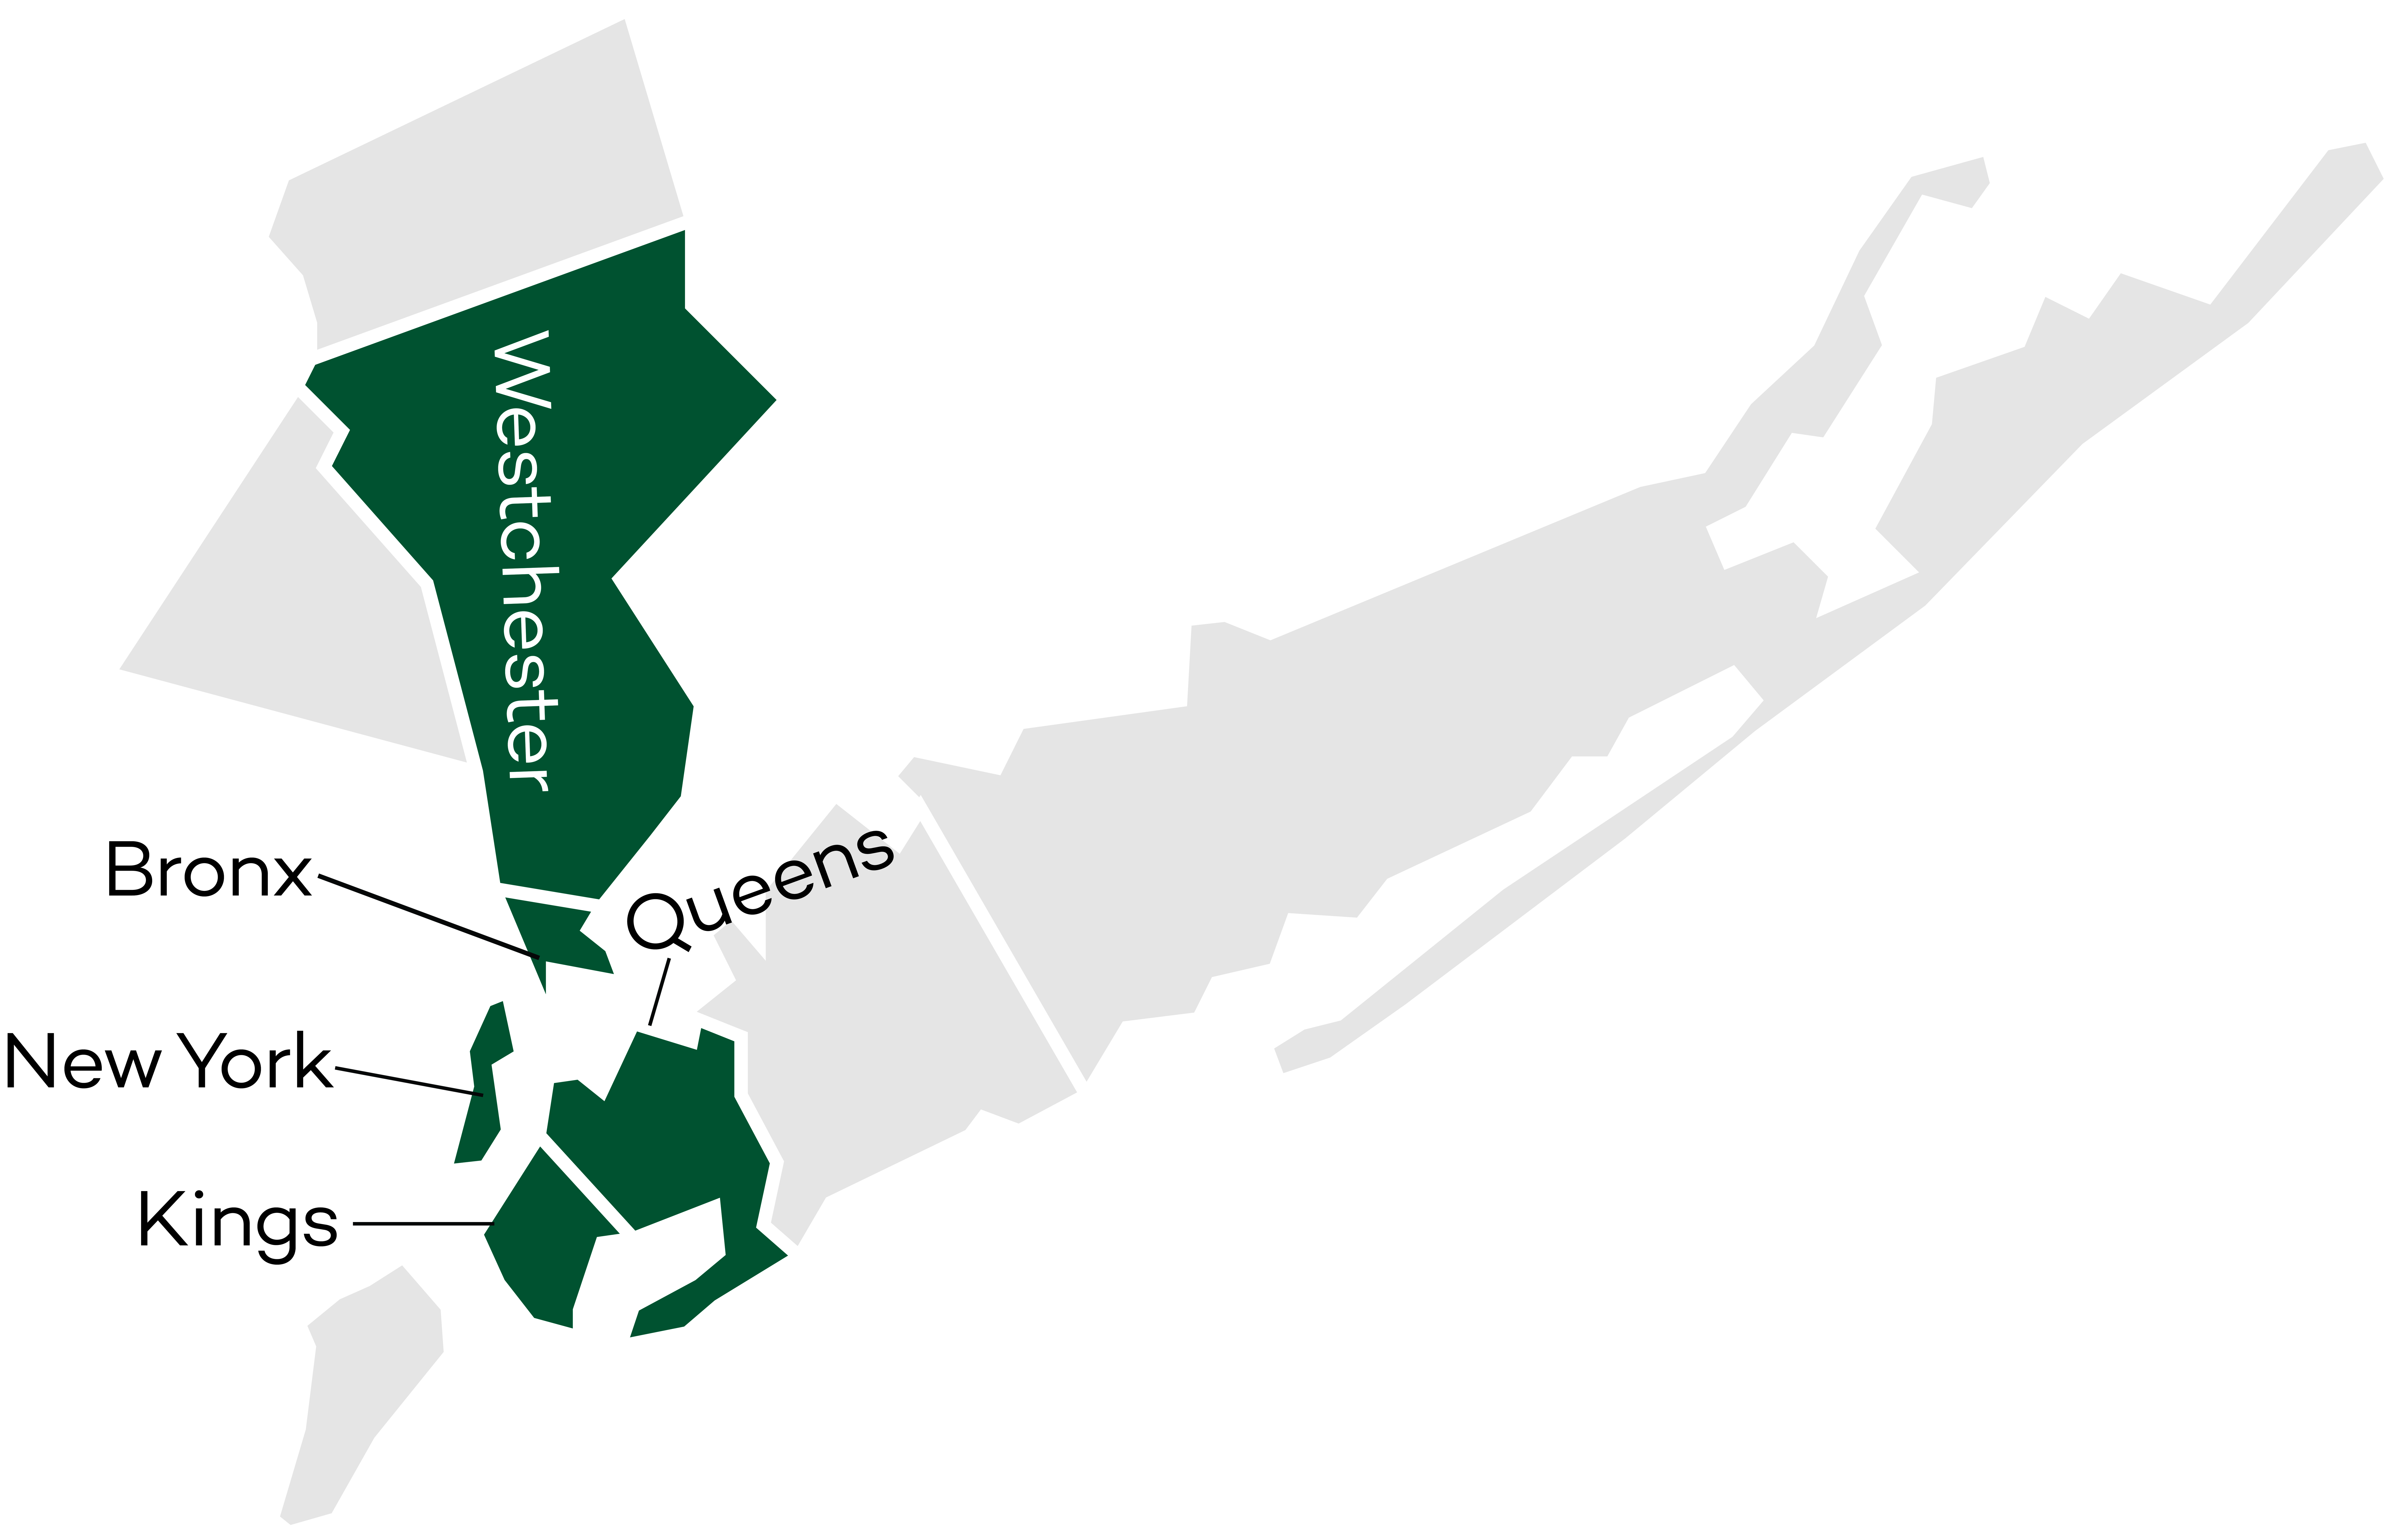 Service area map of New York